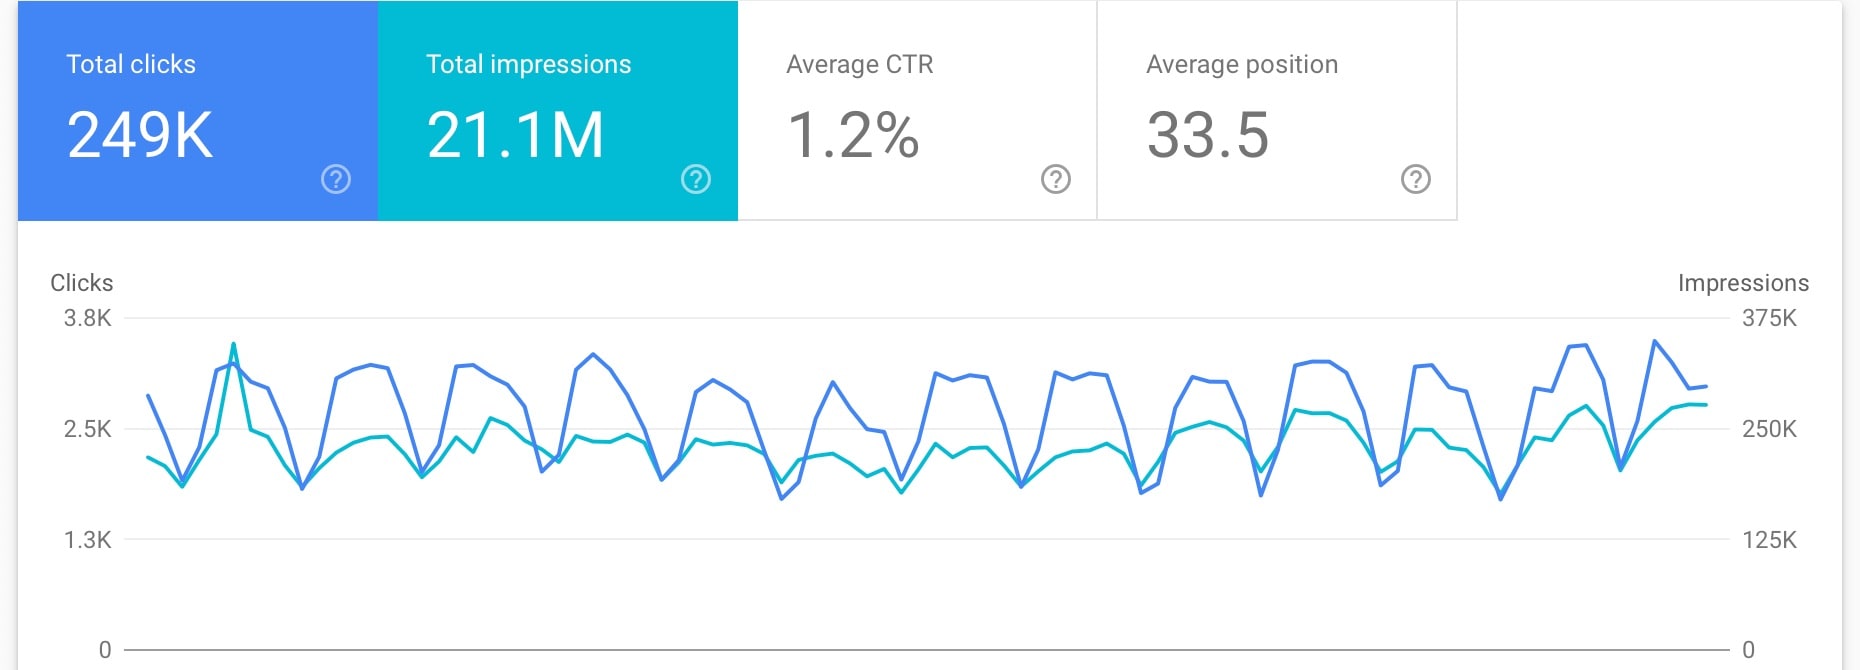 Google search console “Search Results” performance report